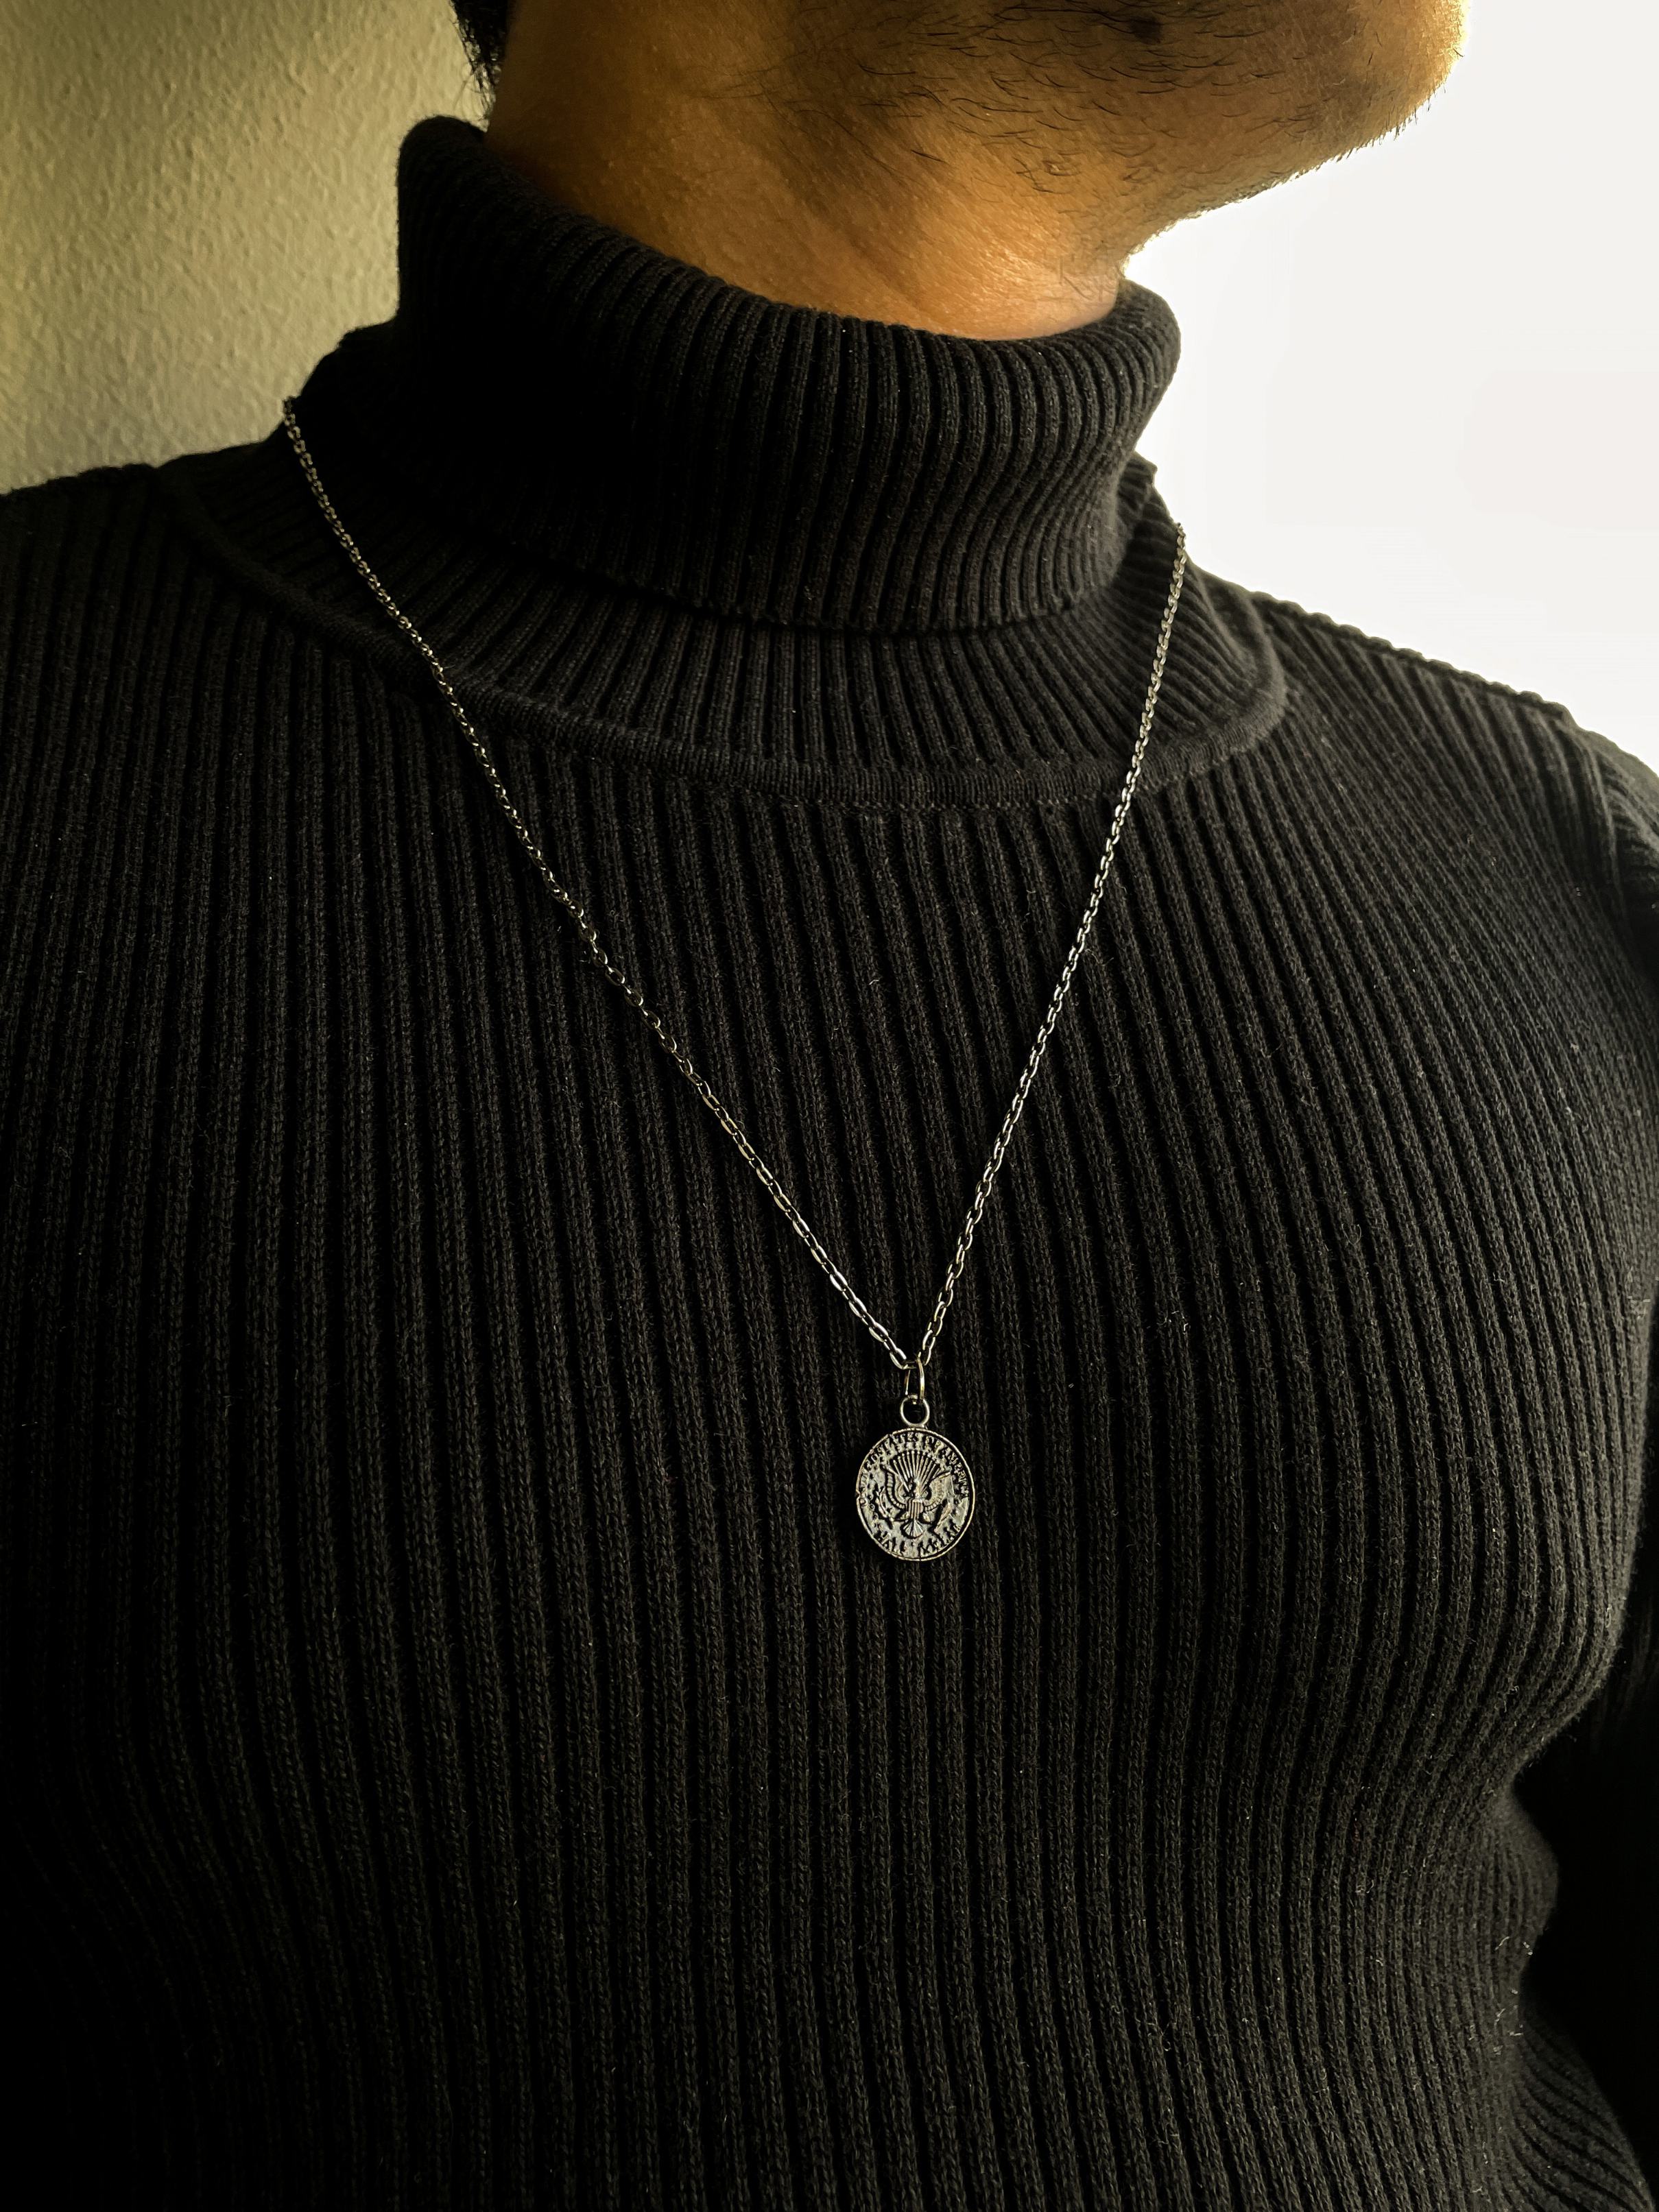 Engraved Bar Name Necklace in Silver - Black Cord Necklace by Talisa